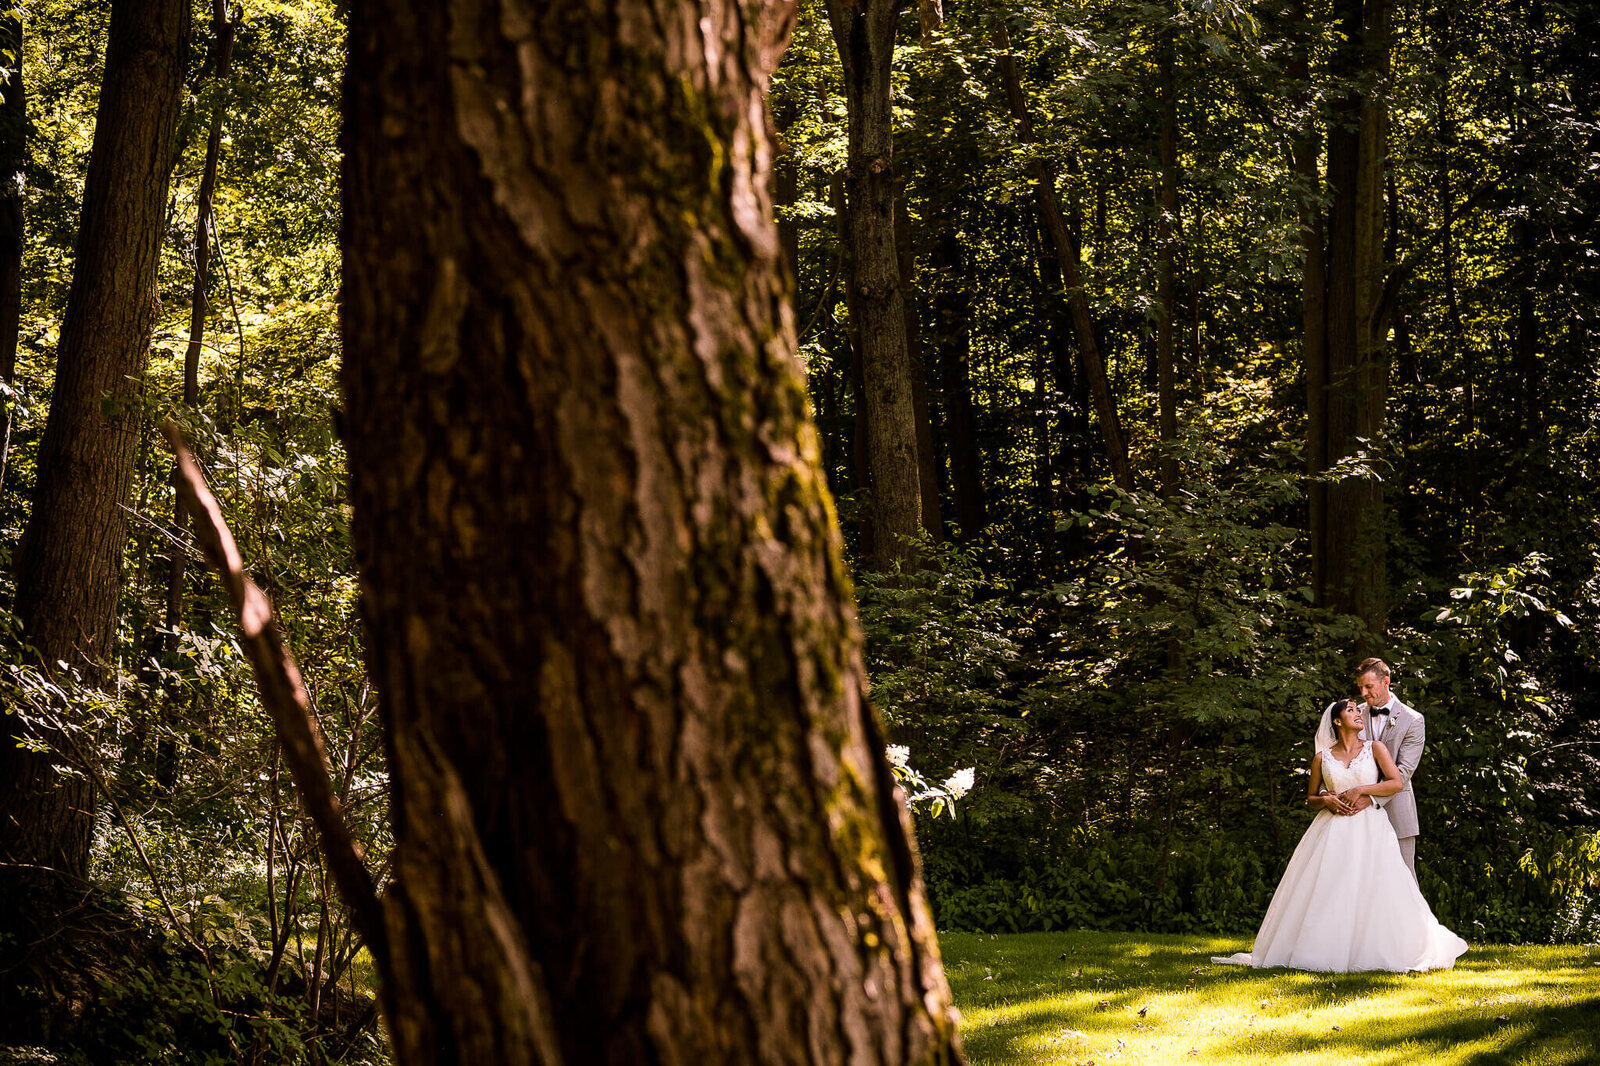 Candid photo of bride and groom with forest setting.